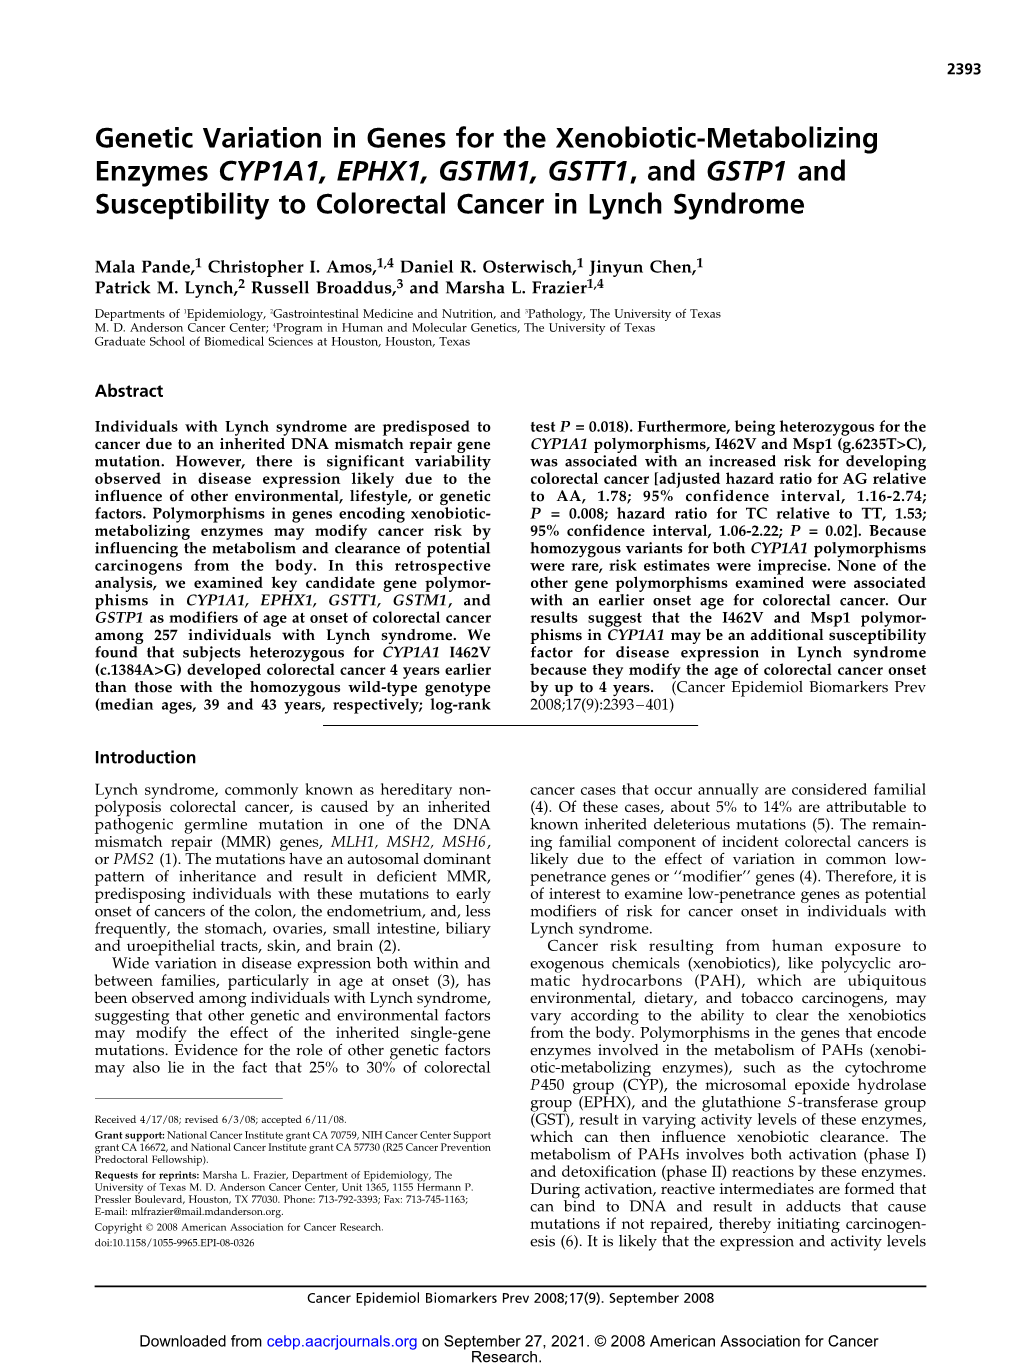 Genetic Variation in Genes for the Xenobiotic-Metabolizing Enzymes CYP1A1, EPHX1, GSTM1, GSTT1, and GSTP1 and Susceptibility to Colorectal Cancer in Lynch Syndrome